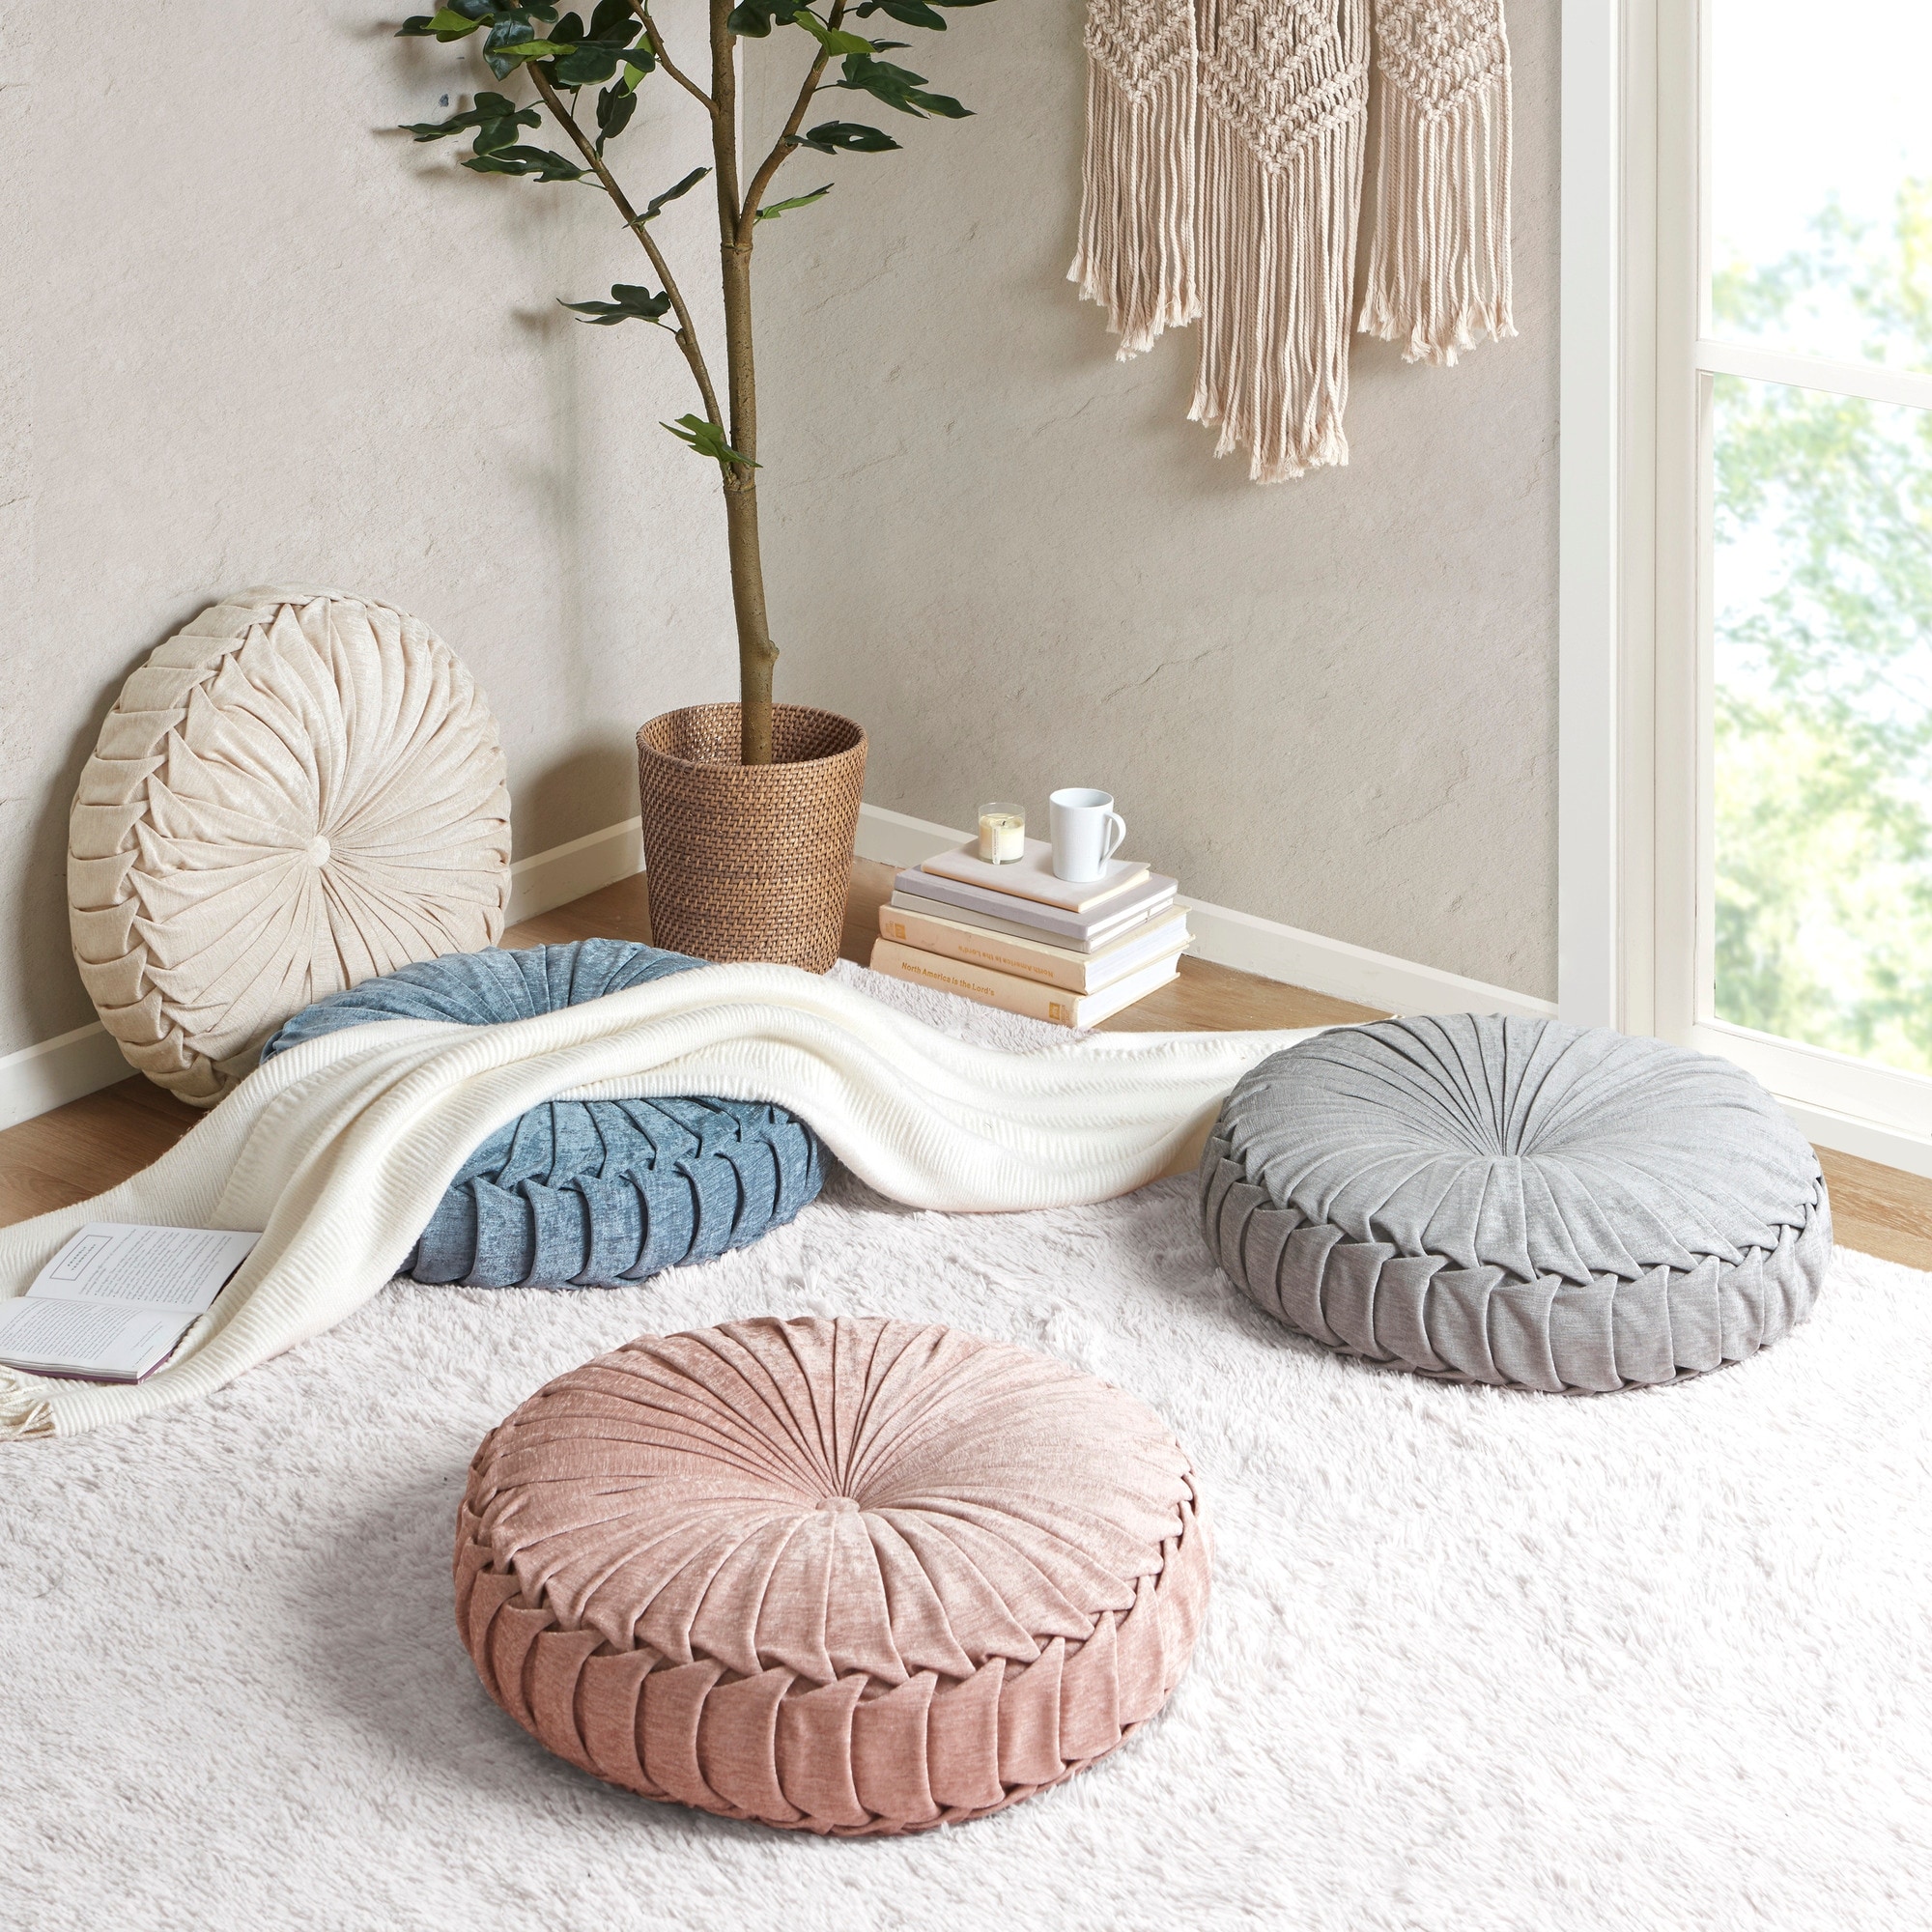 https://ak1.ostkcdn.com/images/products/is/images/direct/1d21fc293410934fe5b1a16328c21cbedb0159f1/Lara-Poly-Chenille-Round-Floor-Pillow-Cushion-by-Intelligent-Design.jpg